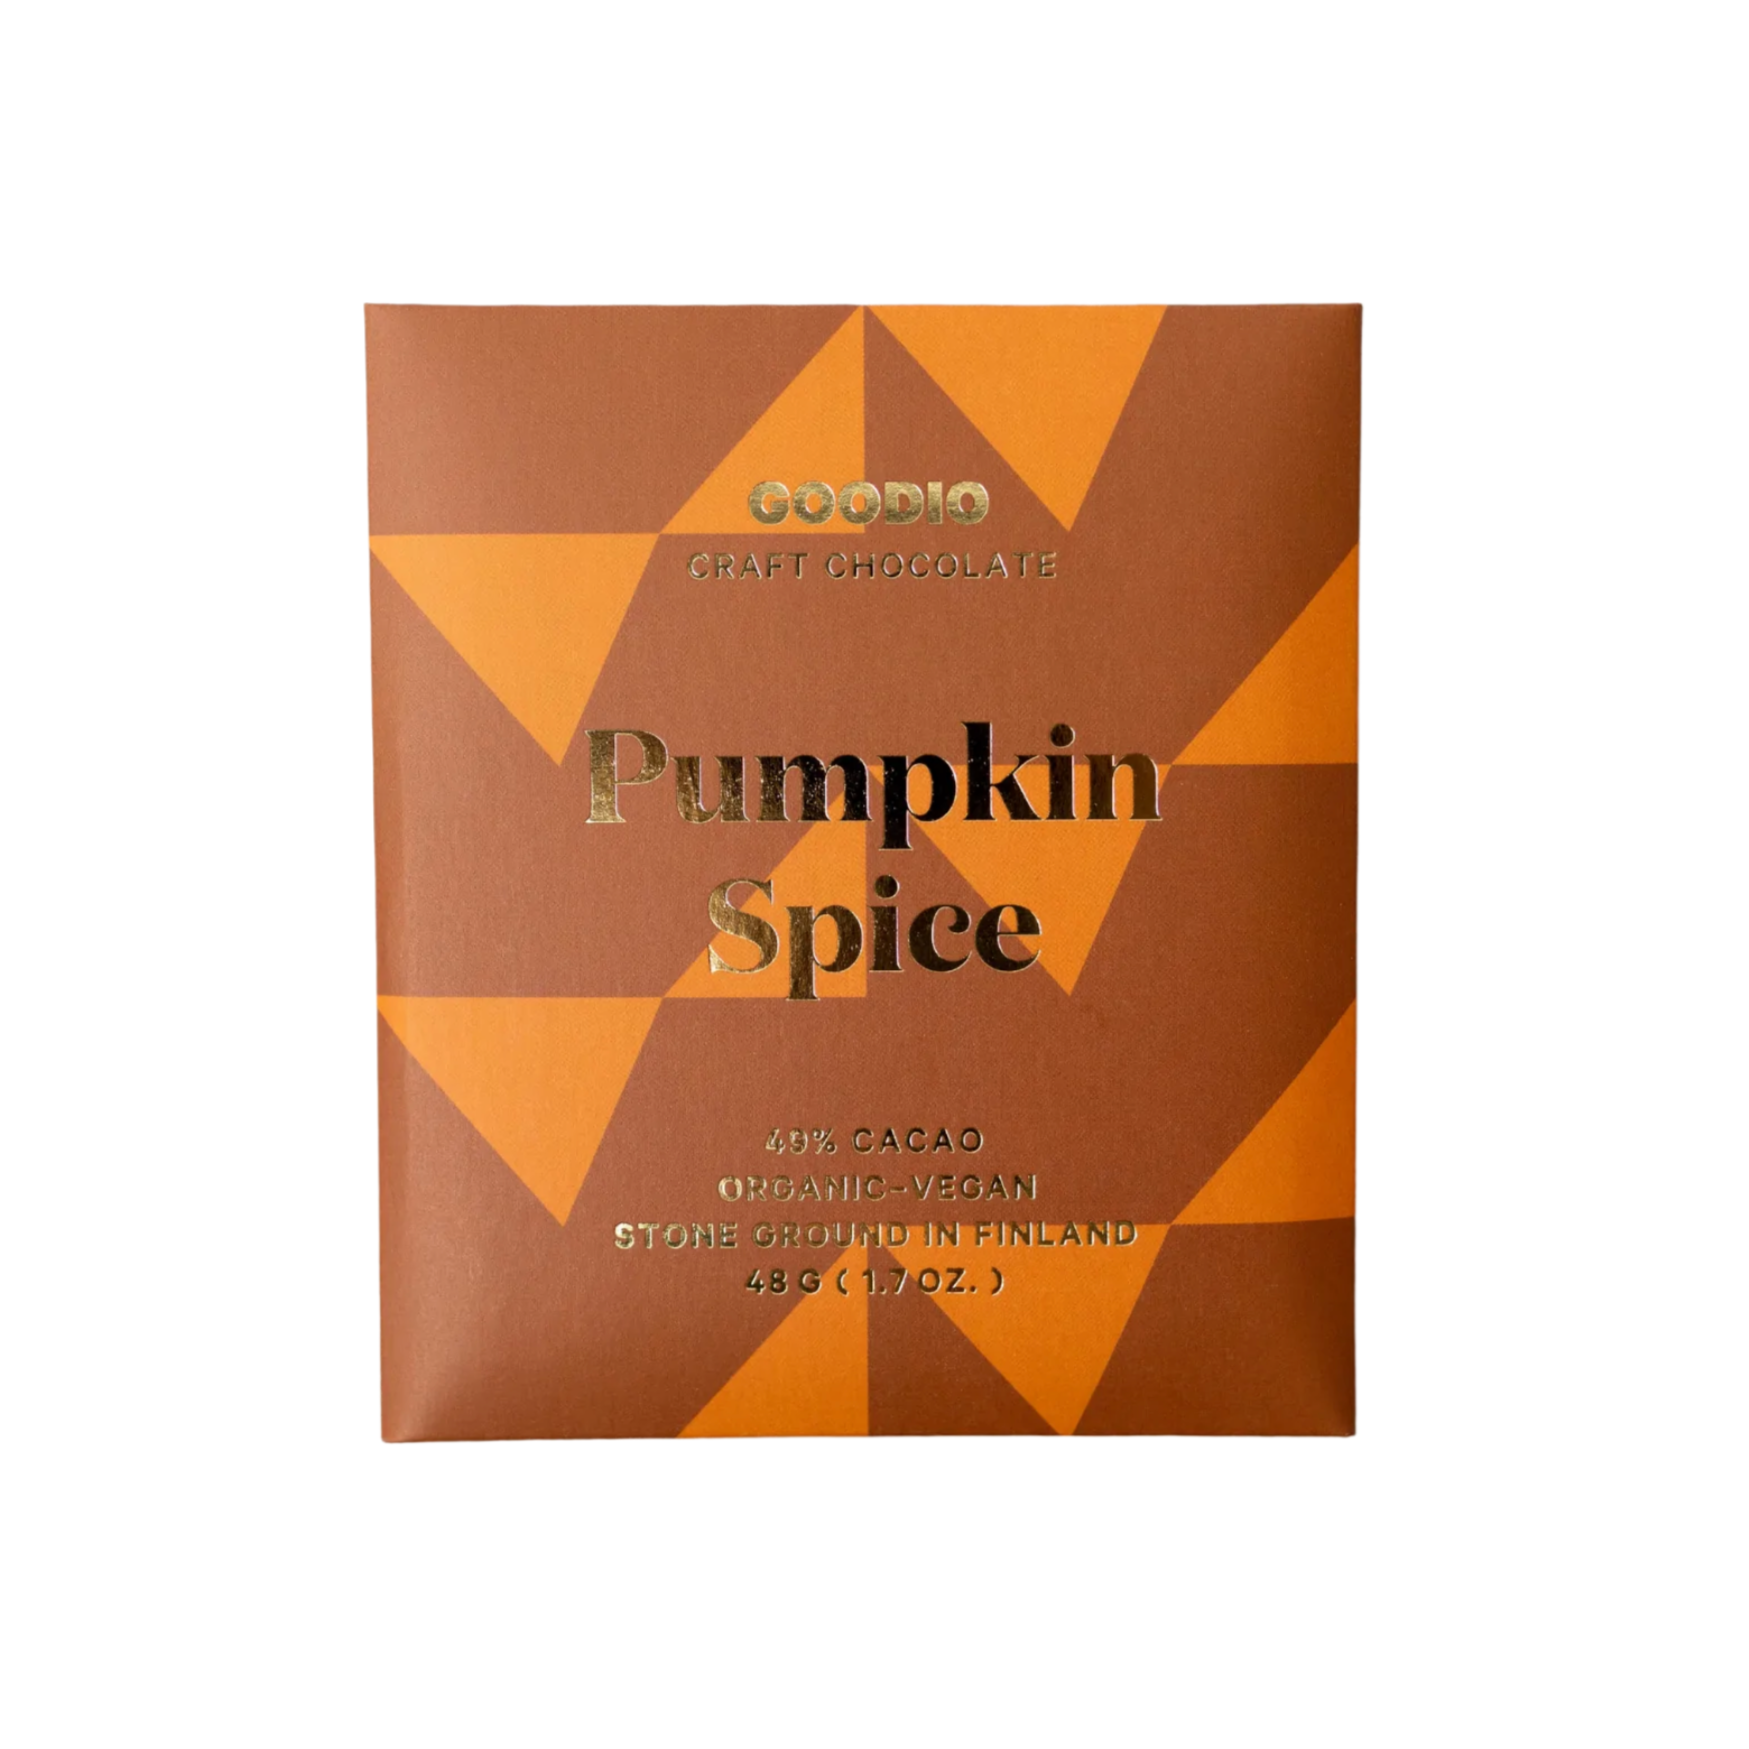 A square chocolate bar packaged in brown and orange geometric designed paper. Gold leaf writing on packaging reads, "Goodio Craft Chocolate Pumpkin Spice 49% Cacao Organic - Vegan Stone Ground in Finland 48g (1.7 oz.)".